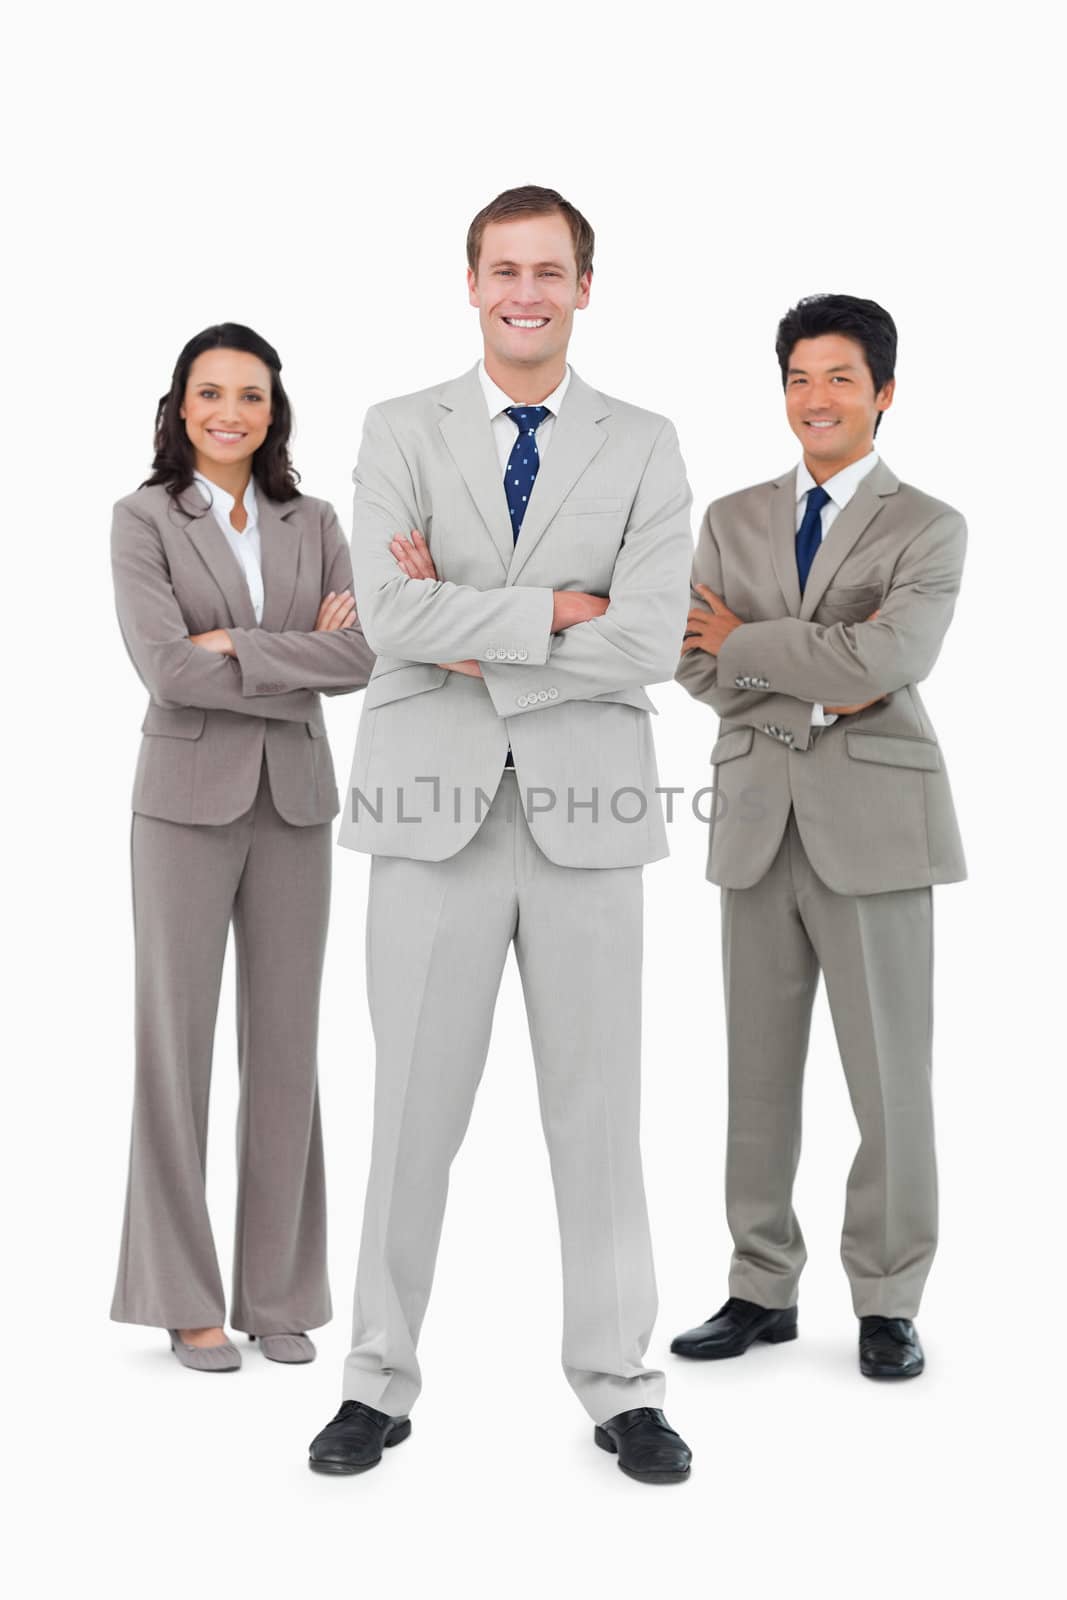 Smiling businessteam with folded arms against a white background